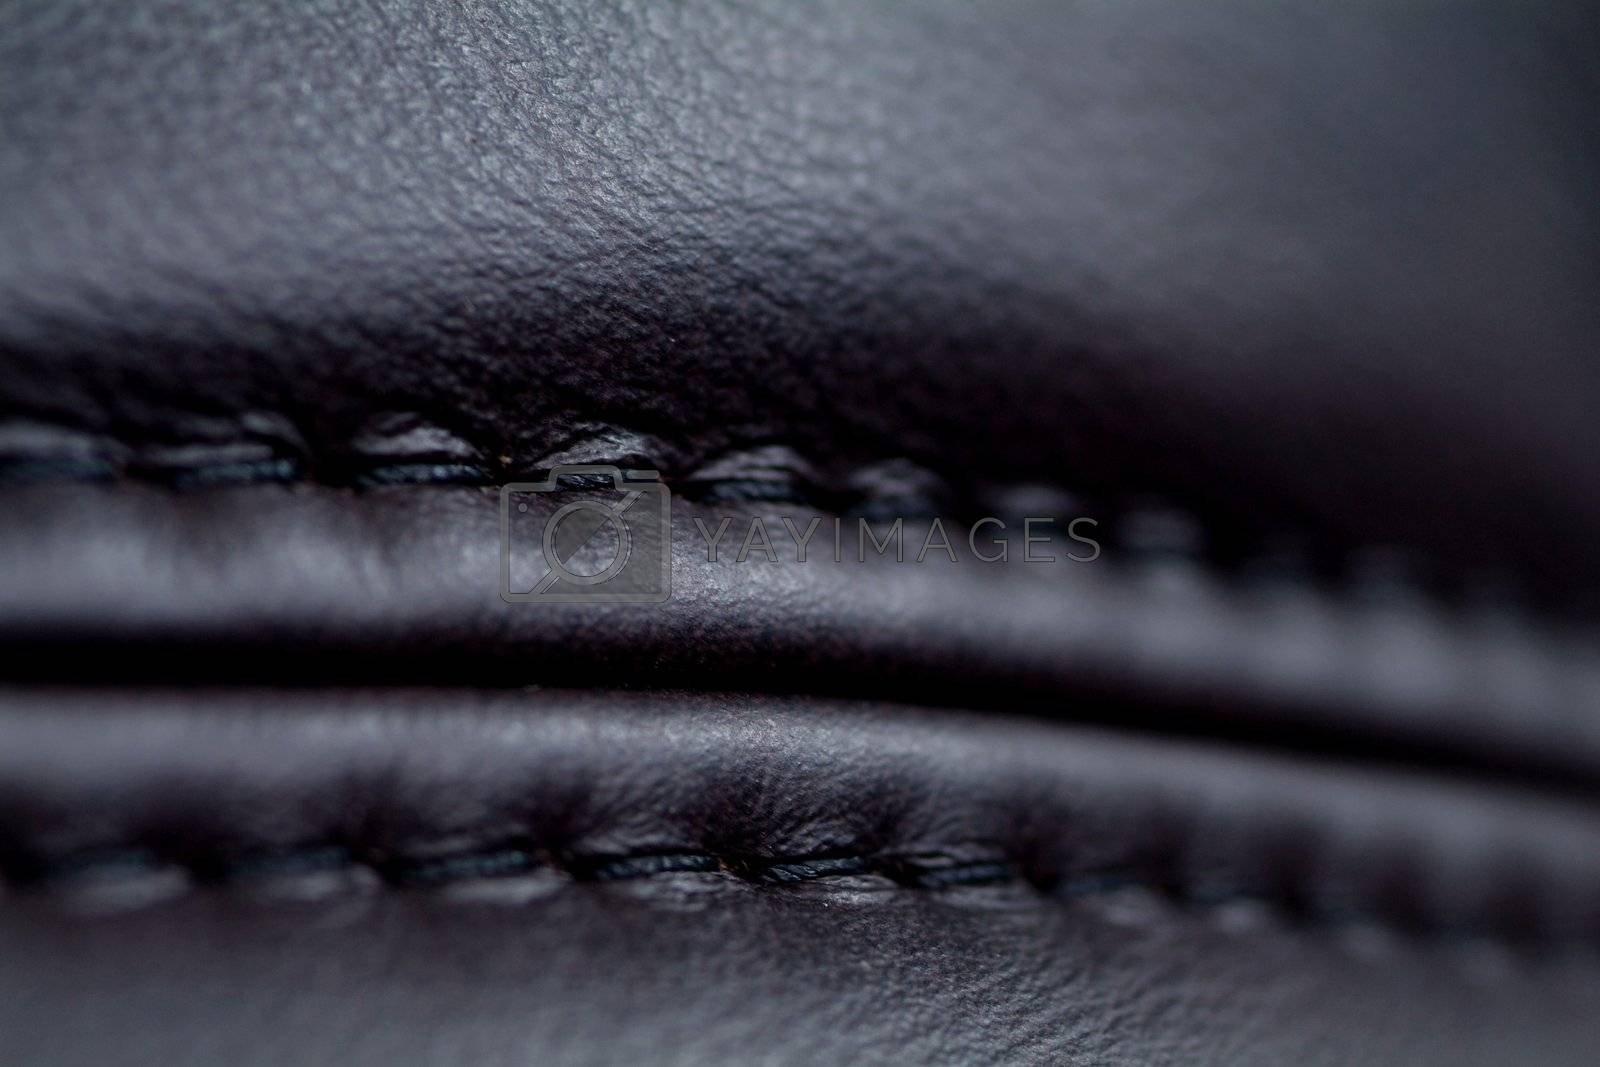 Royalty free image of Seam on black leather by epixx